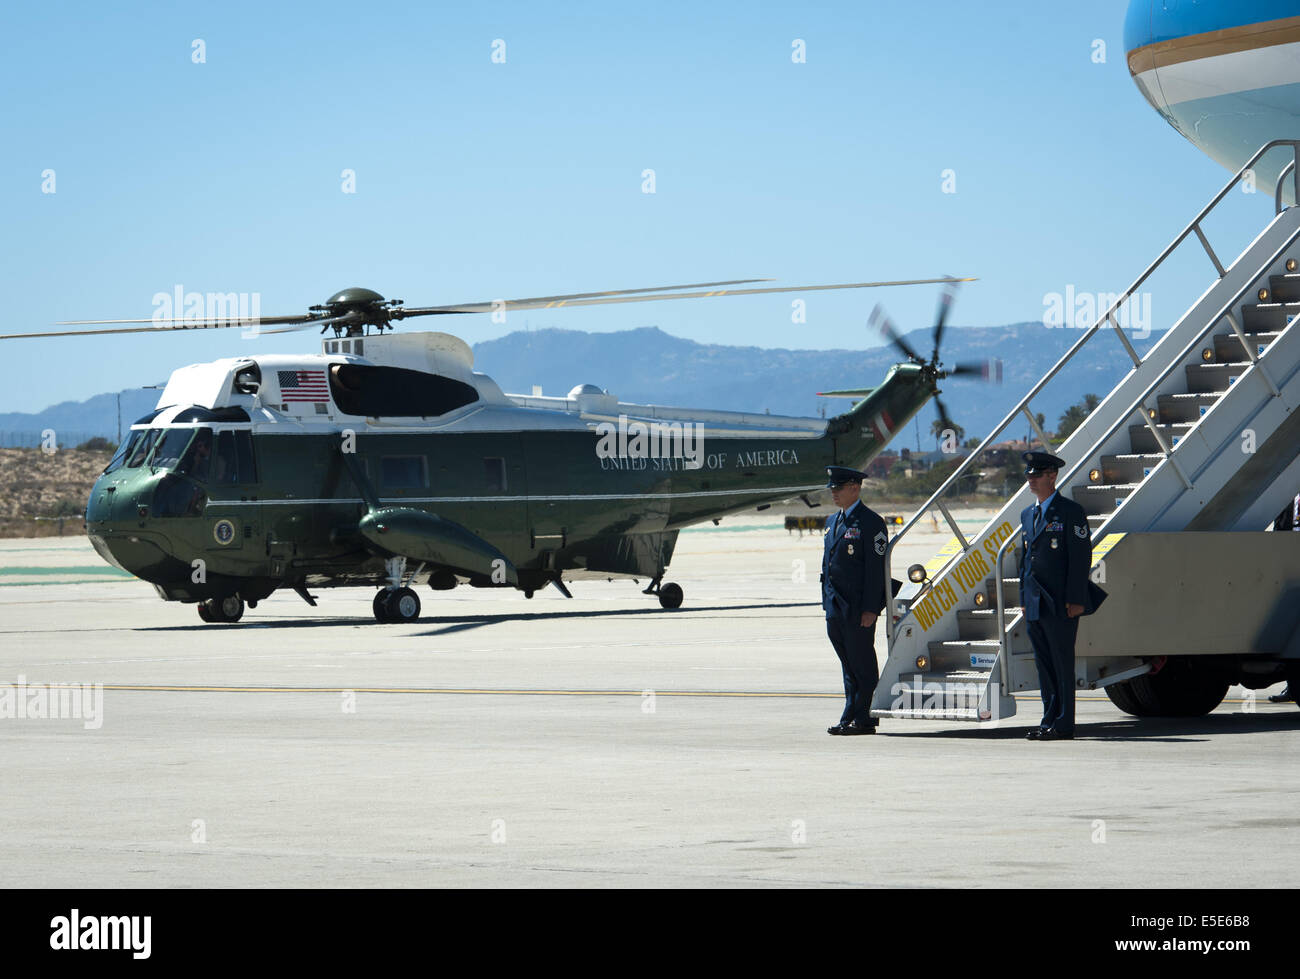 July 23, 2014 - Los Angeles, California, U.S - Marine One --- A Marine One Escort warms up along side Air Force One after the arrival of President Obama at LAX on Wednesday July 23, 2014.  Sikorsky's SH-3 Sea King helicopter has been in use by the US Marine Corps' HMX-1 squadron as the first choice for Marine One since not long after it was placed in service by the US Navy in 1961.  The familiar metallic green with white top Sea King is transported, along with the presidential limousine and other large equipment via a set of several C-17 Boeing Globemaster transport aircraft operated by the US Stock Photo